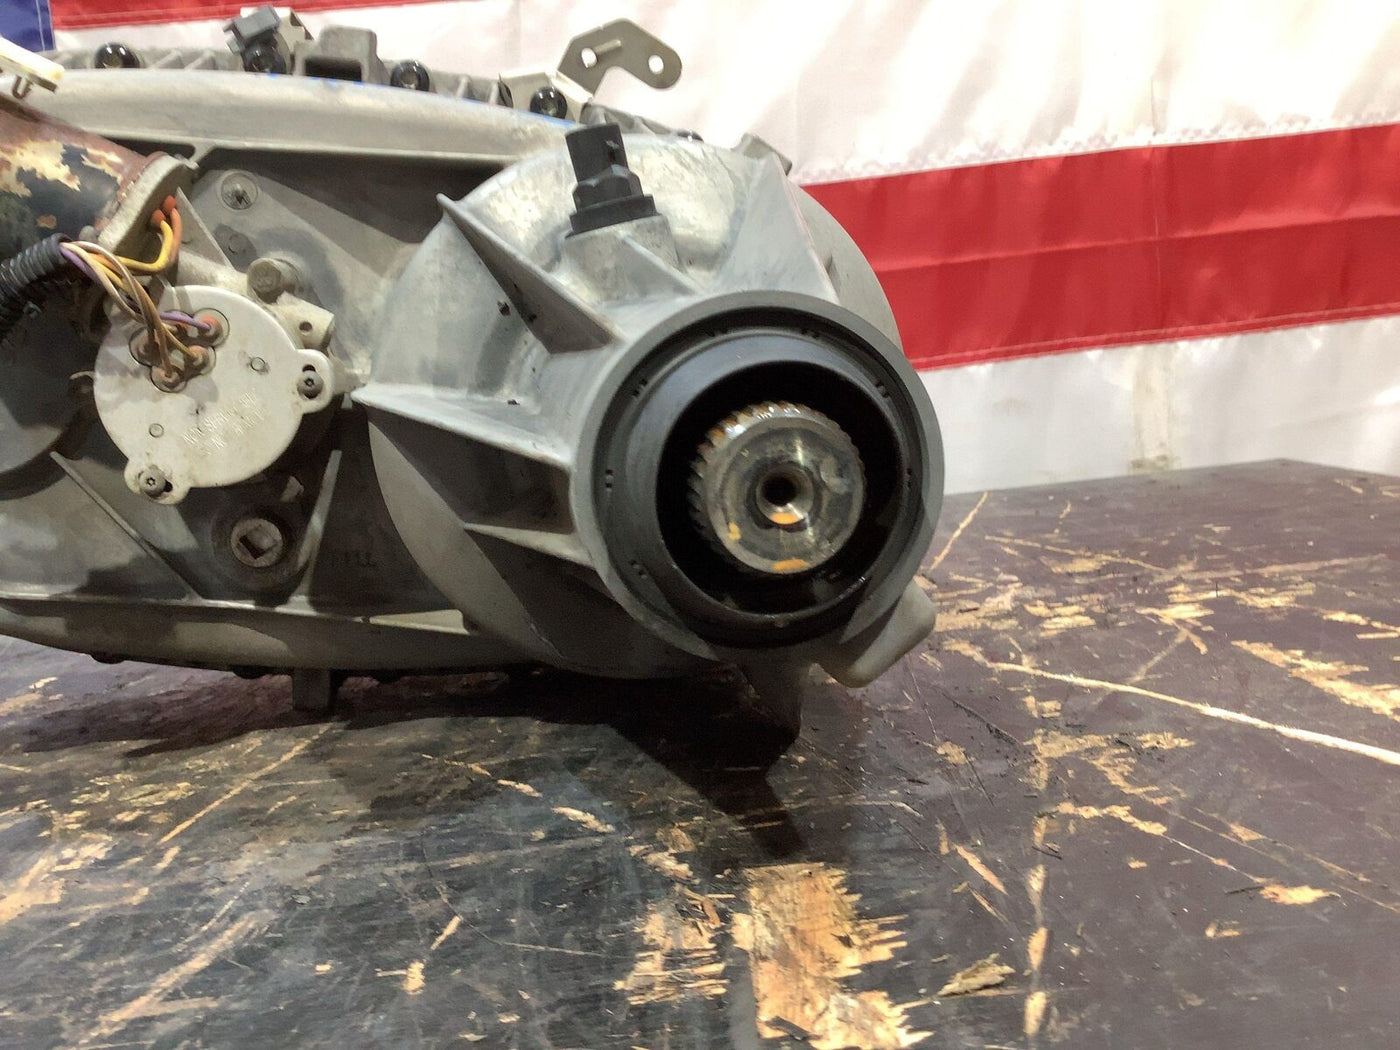 08-09 Hummer H2 AWD Transfer Case (200K Miles) Unable To Test